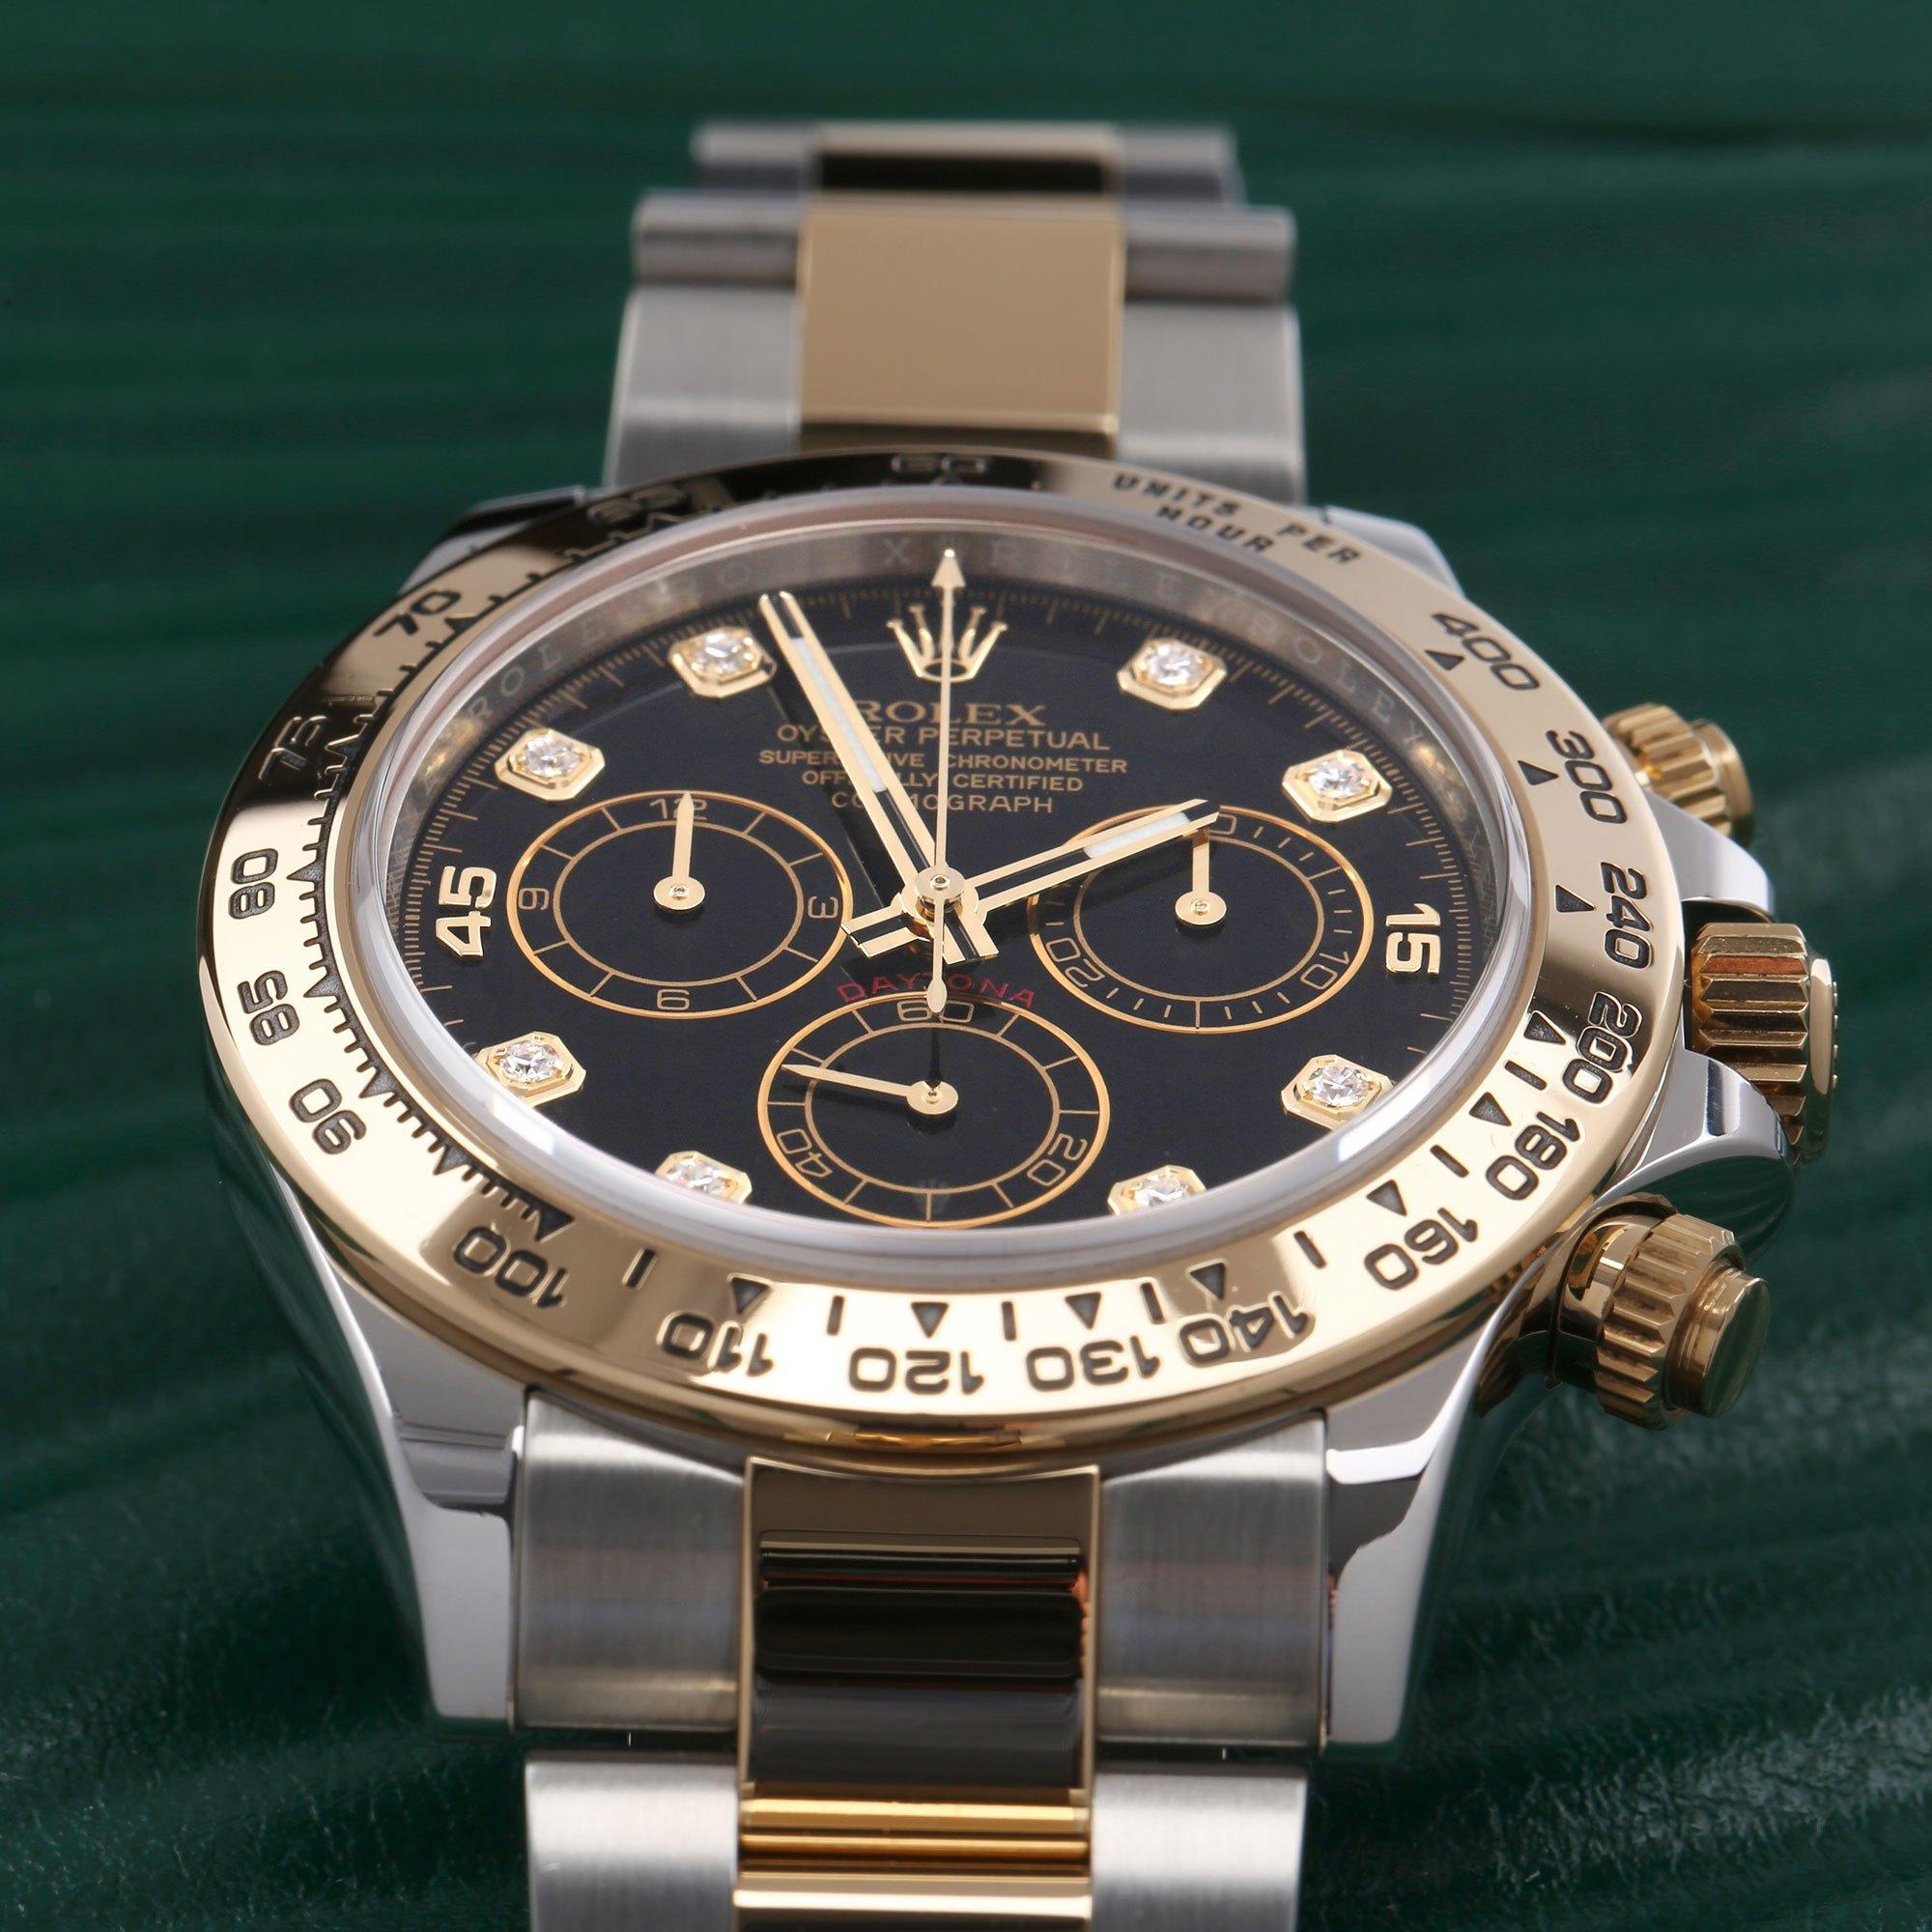 Rolex Daytona 116503 Men's Stainless Steel and Yellow Gold Cosmograph Watch 4